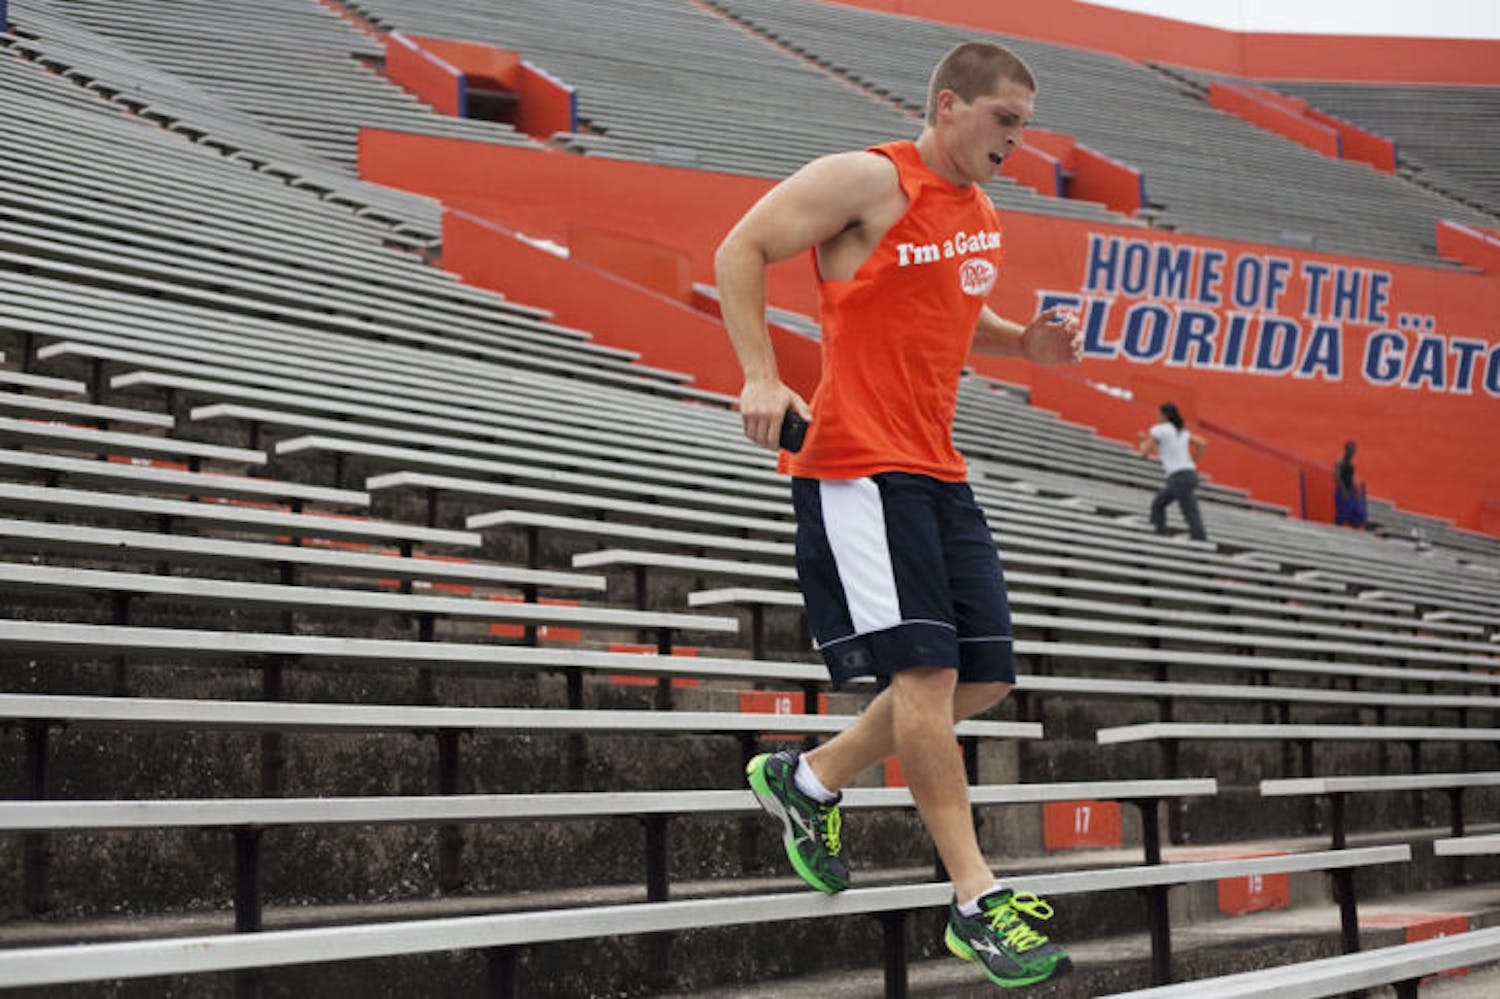 UF engineering freshman Joe Liccini, 19, exercises at Ben Hill Griffin Stadium on Monday. According to a study, walking can lower people’s risk of high blood pressure as much as running can.